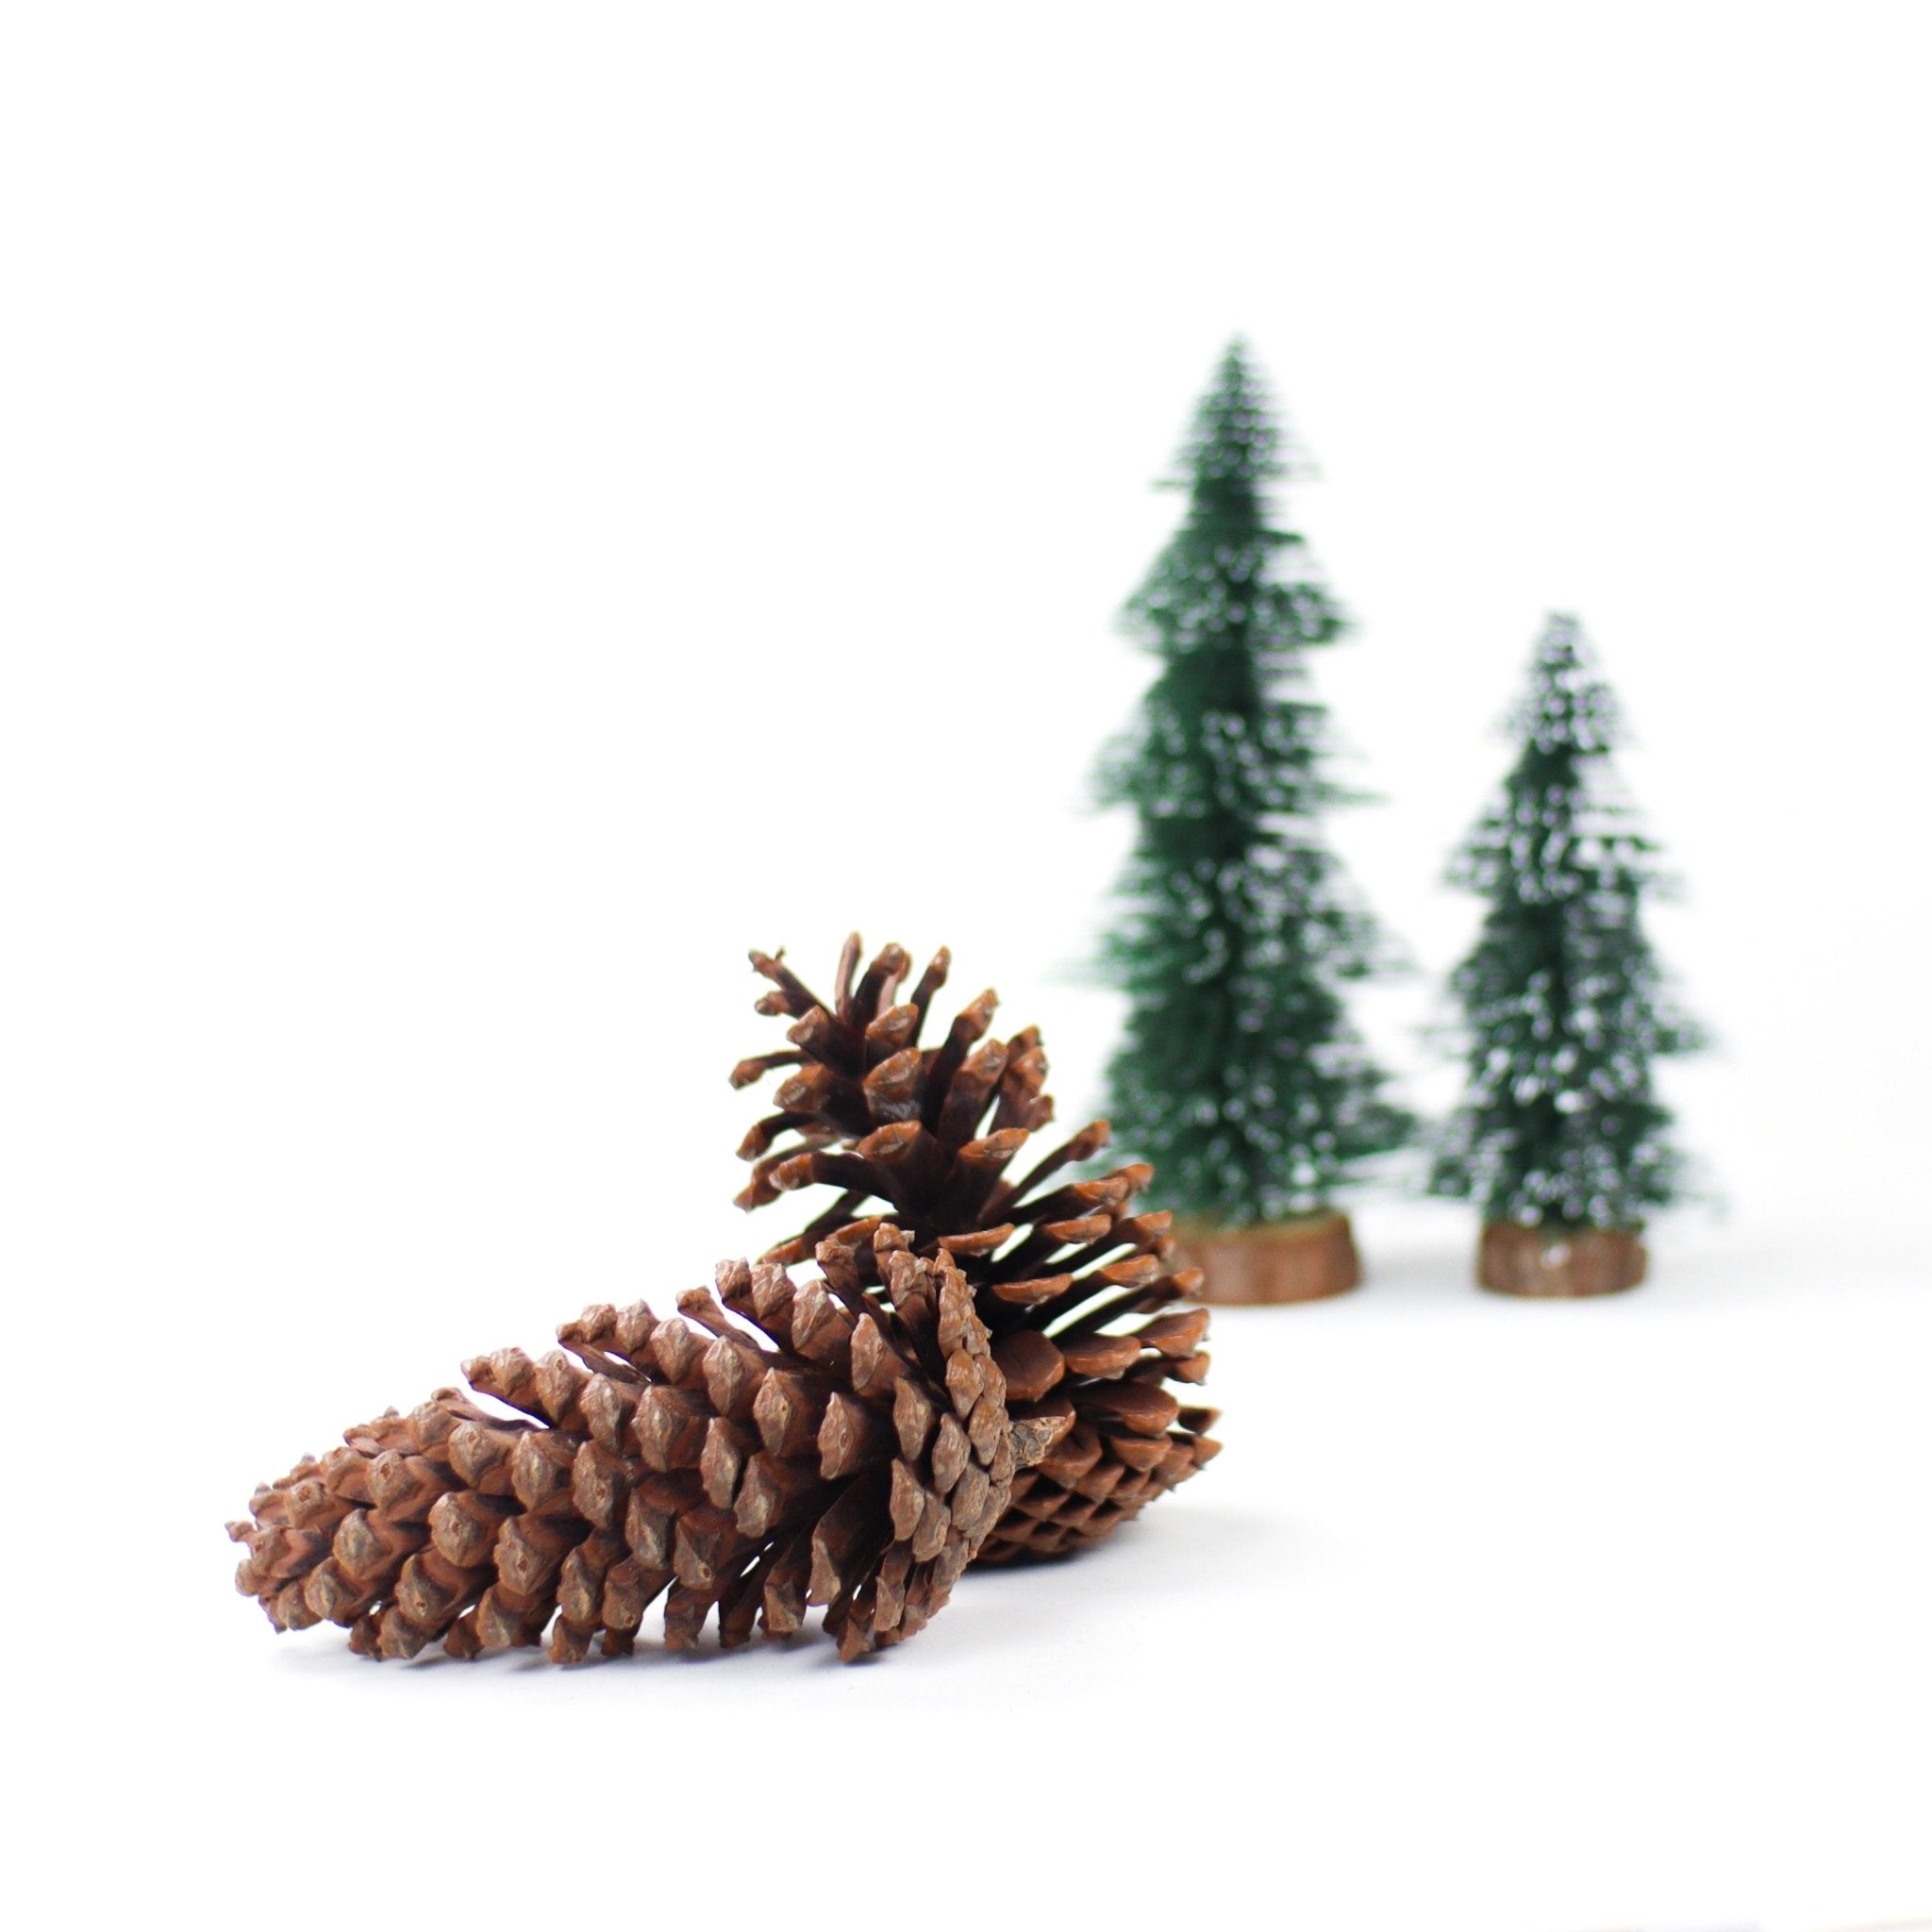 56cm Faux Pine with Pine Cone and Red Berries Pick 00301